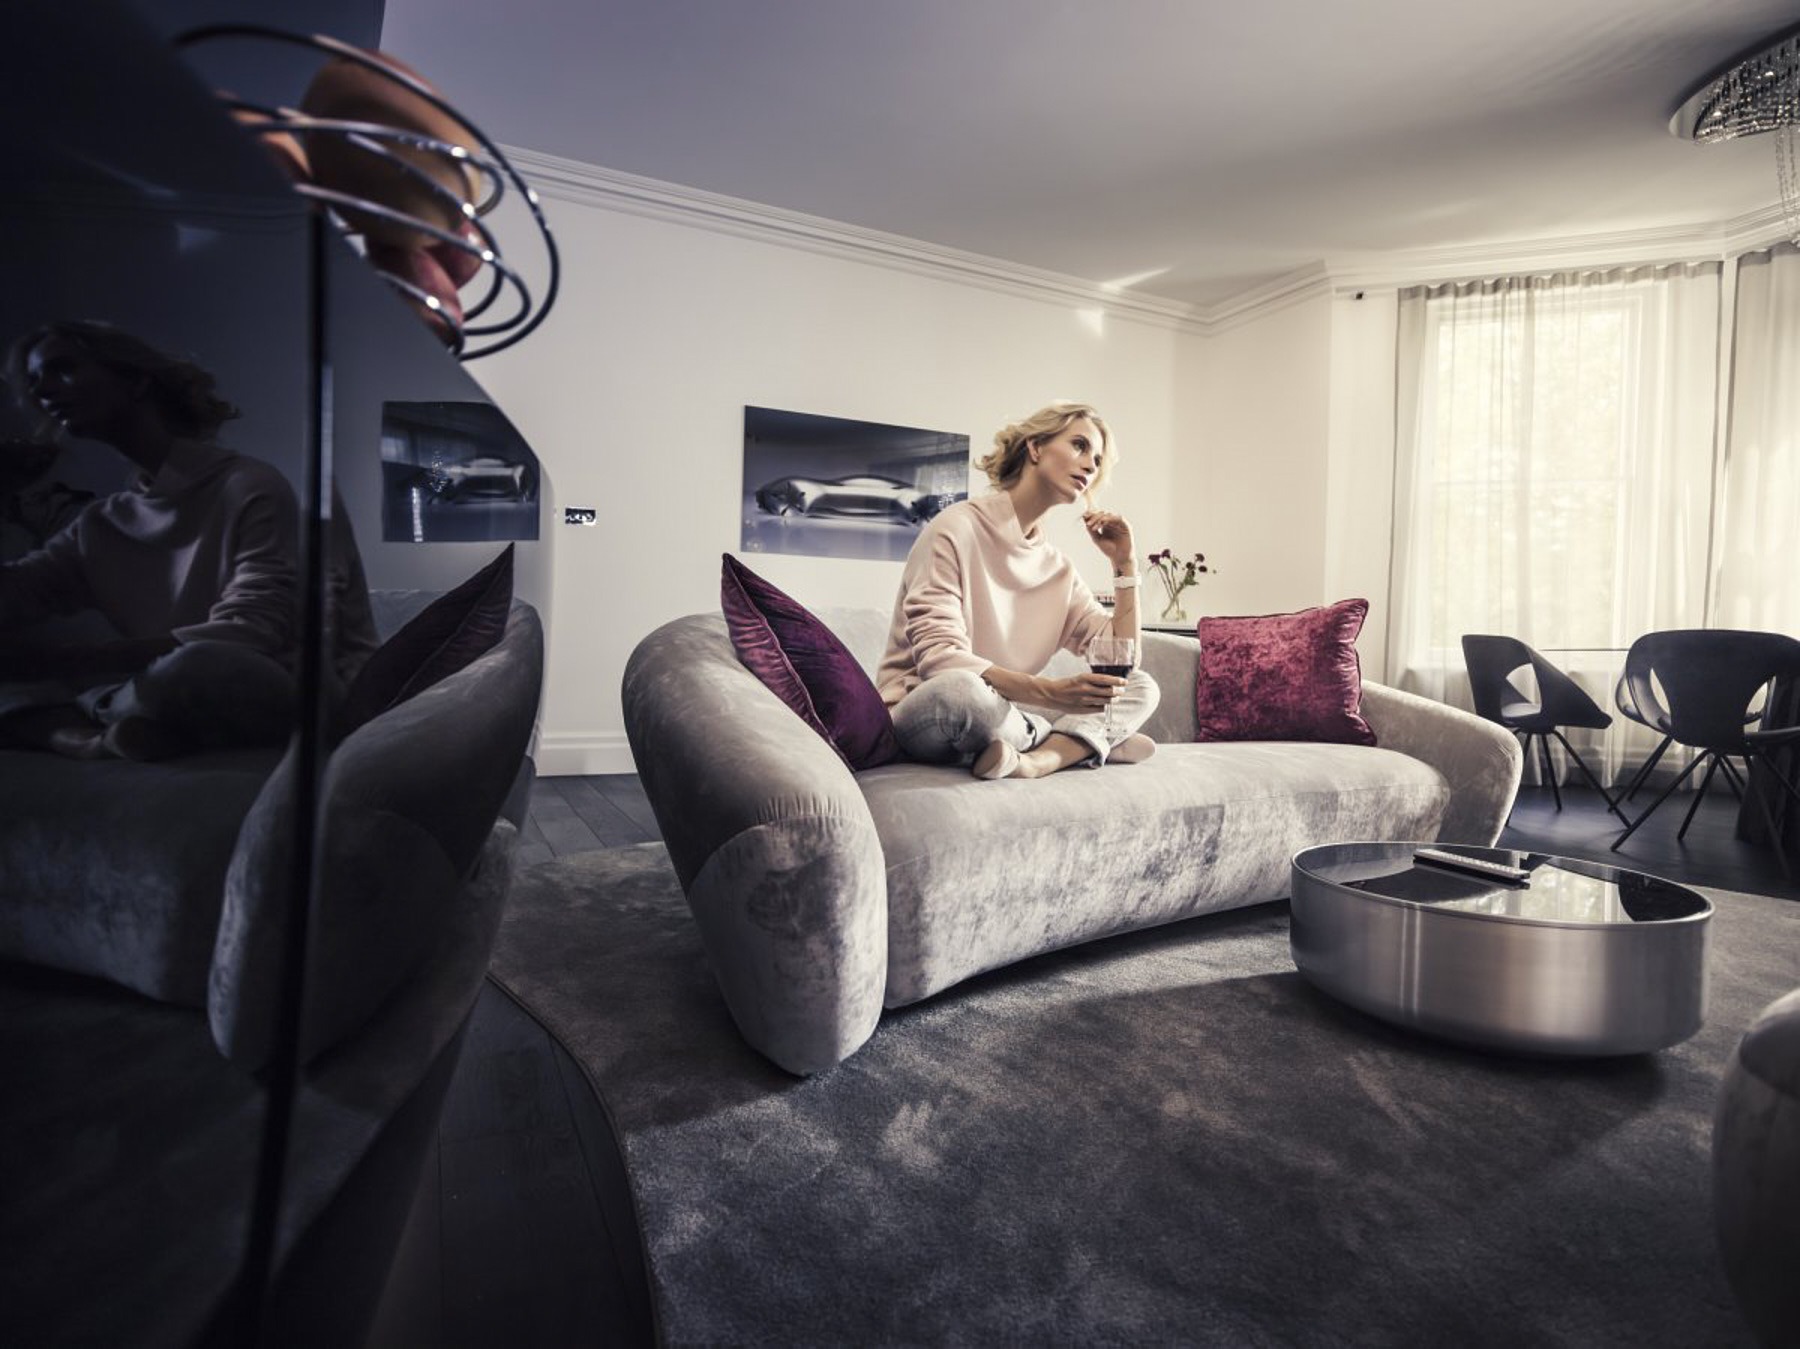 mercedes-benz living @ fraser london campaign (9 images) by Mike Meyer Photography